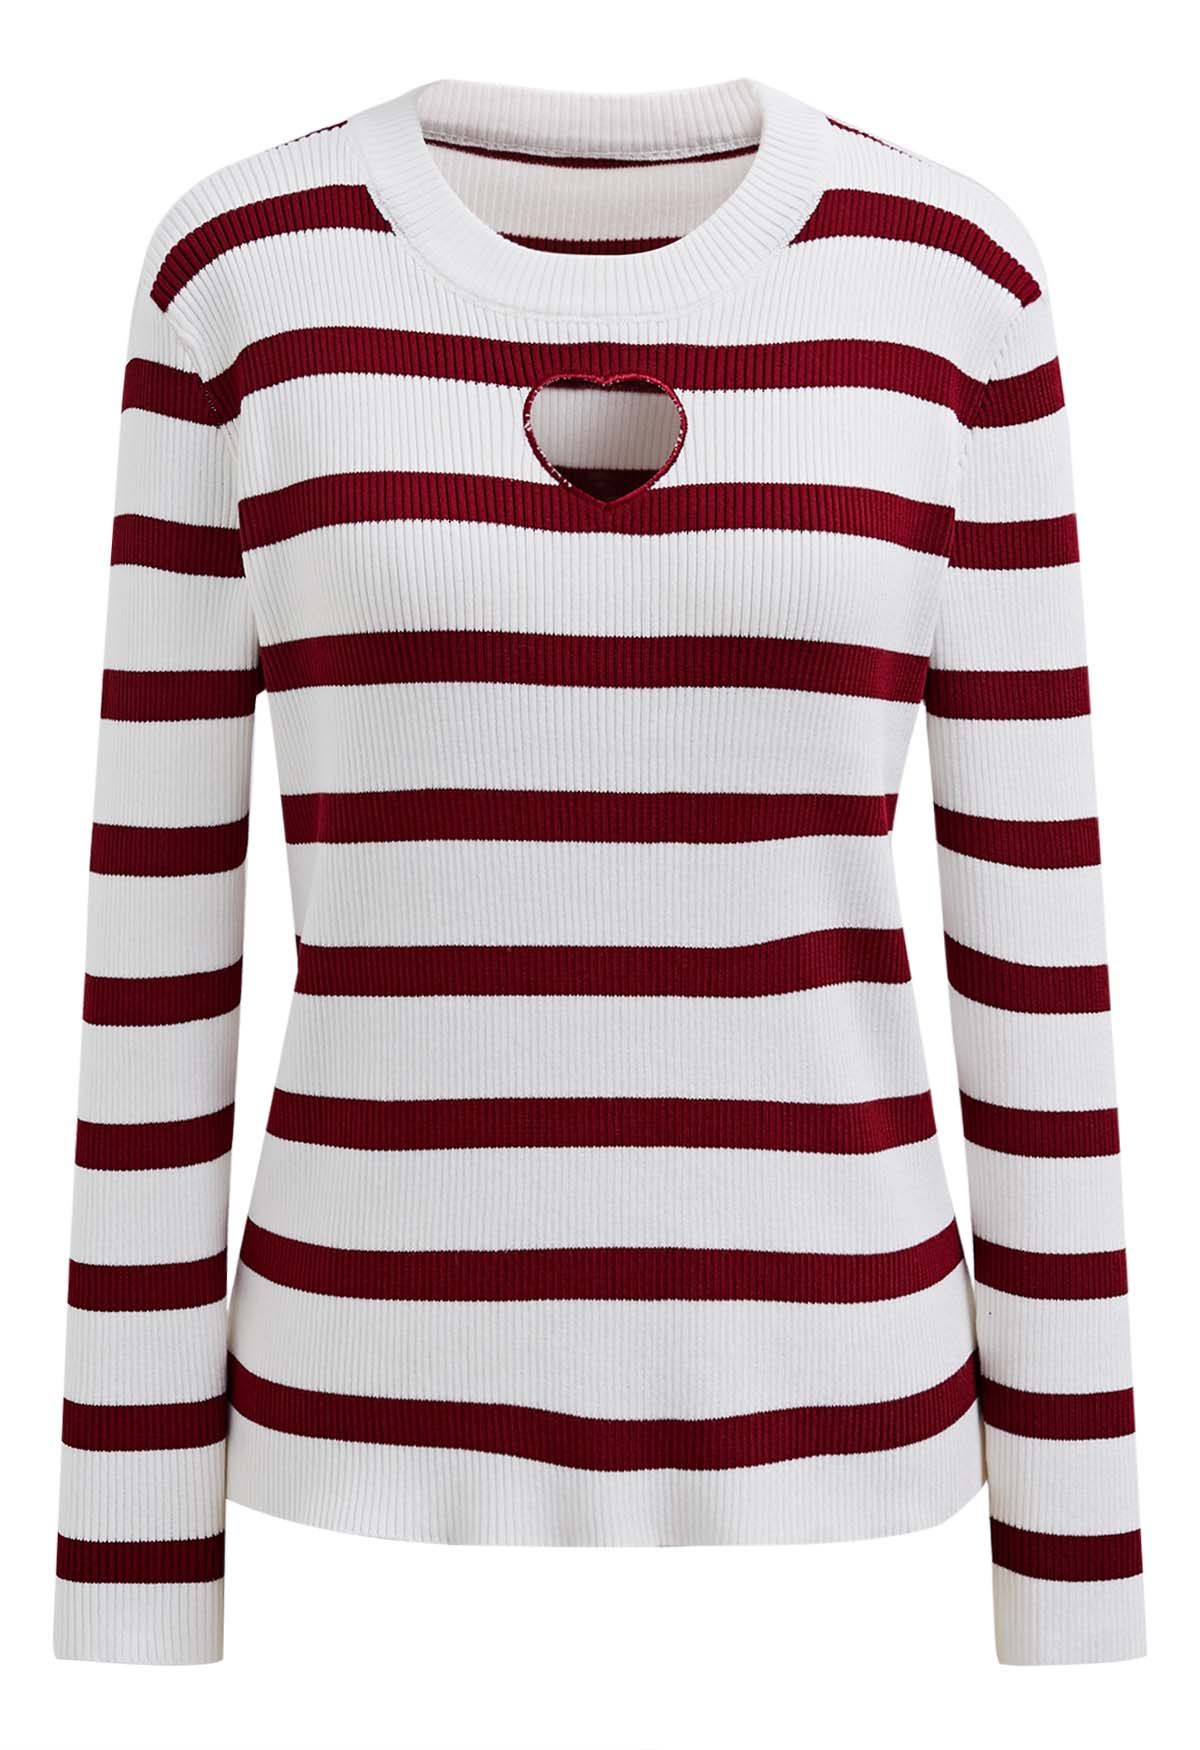 Heart Cut Out Stripe Knit Top in Red